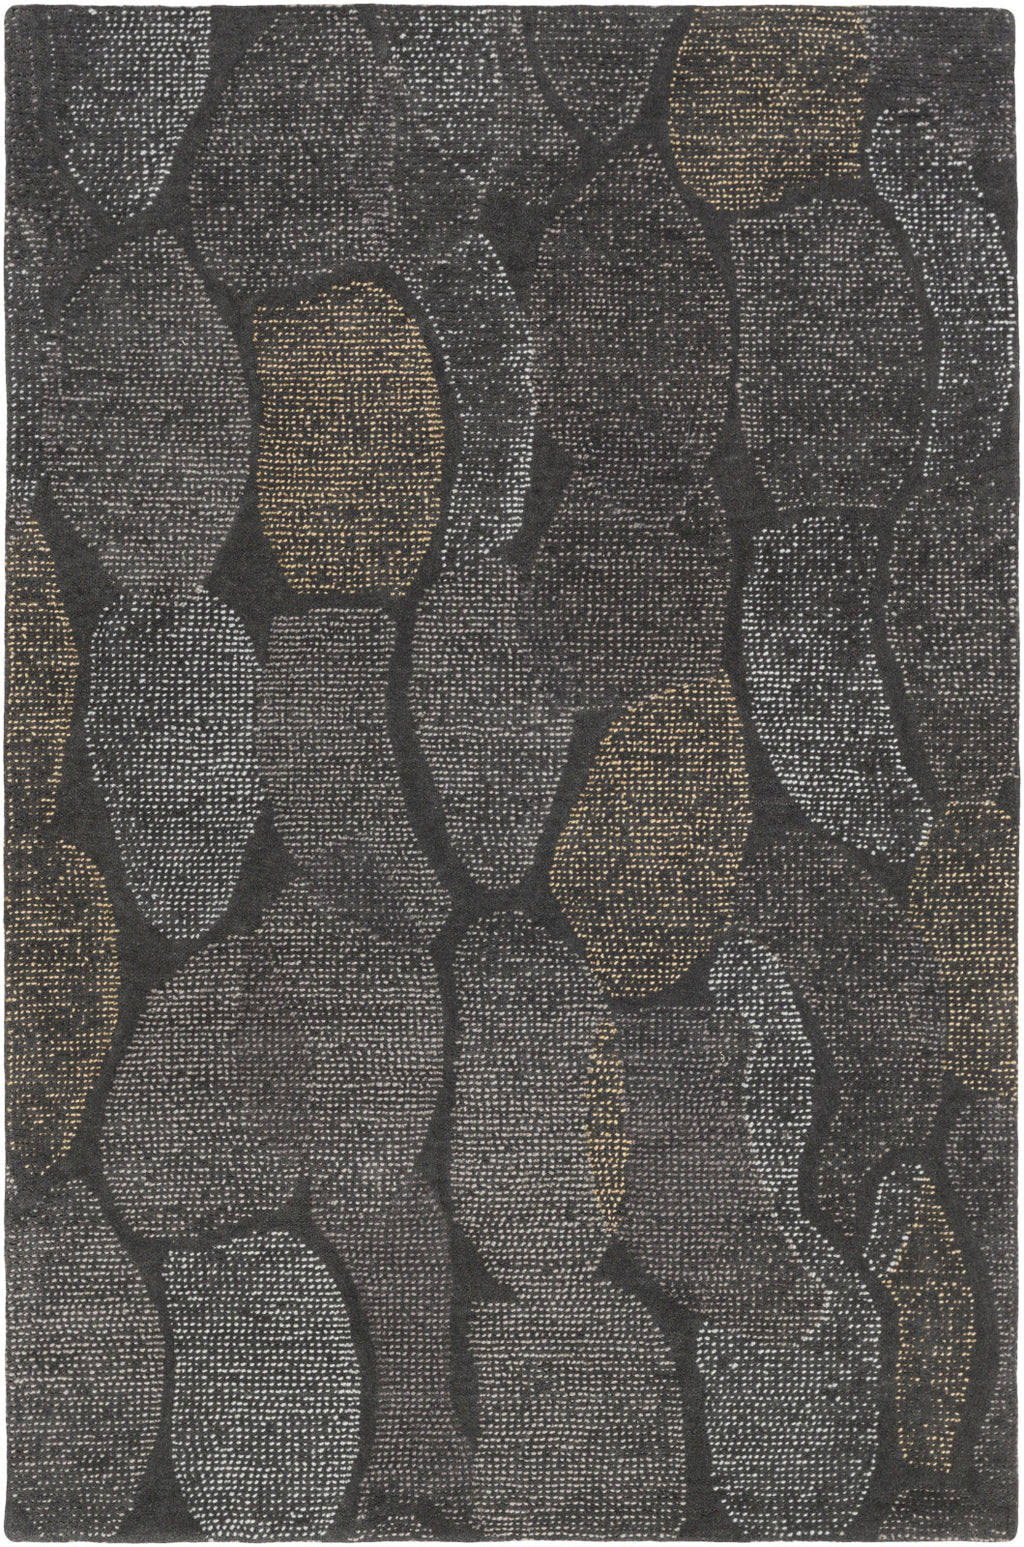 Melody MDY-2011 Gray Area Rug by Surya